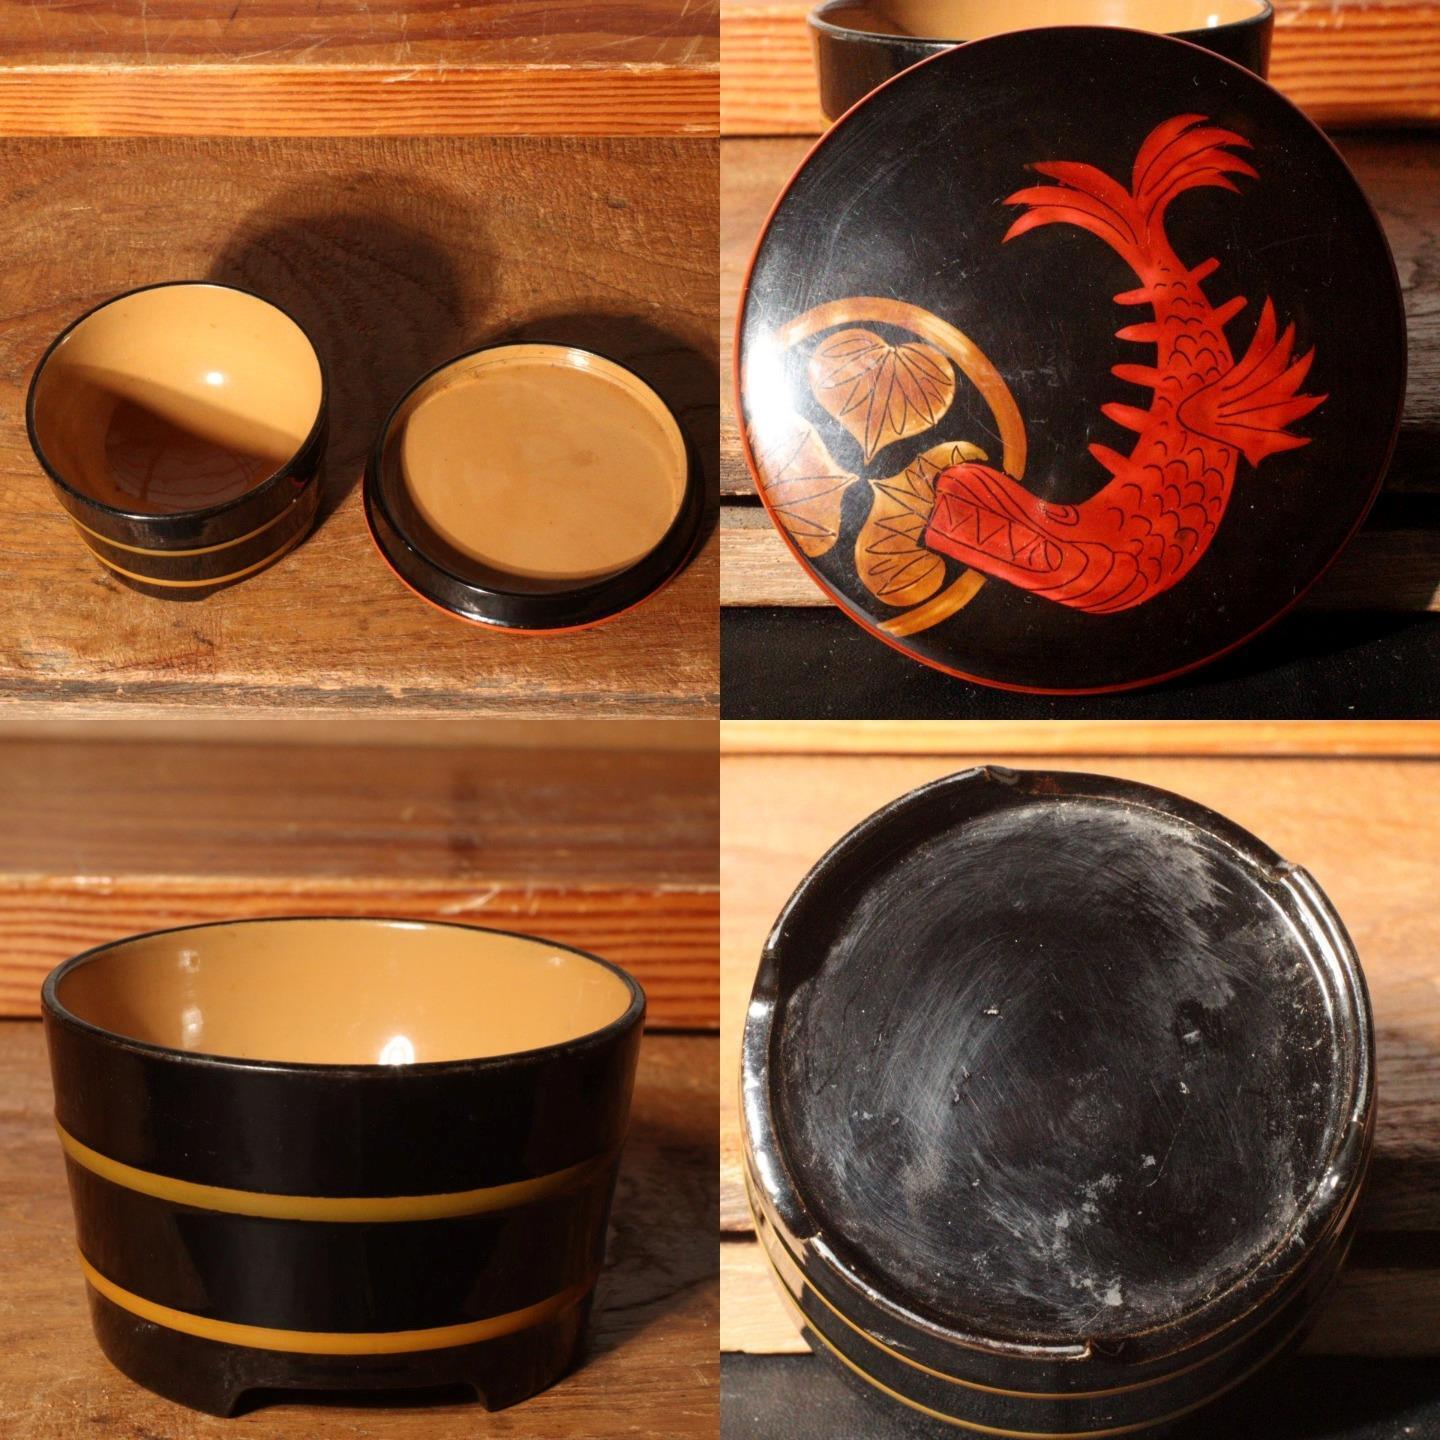 Japanese Vintage wooden Makie Red lacquer plate bowl Natsume set WBX206